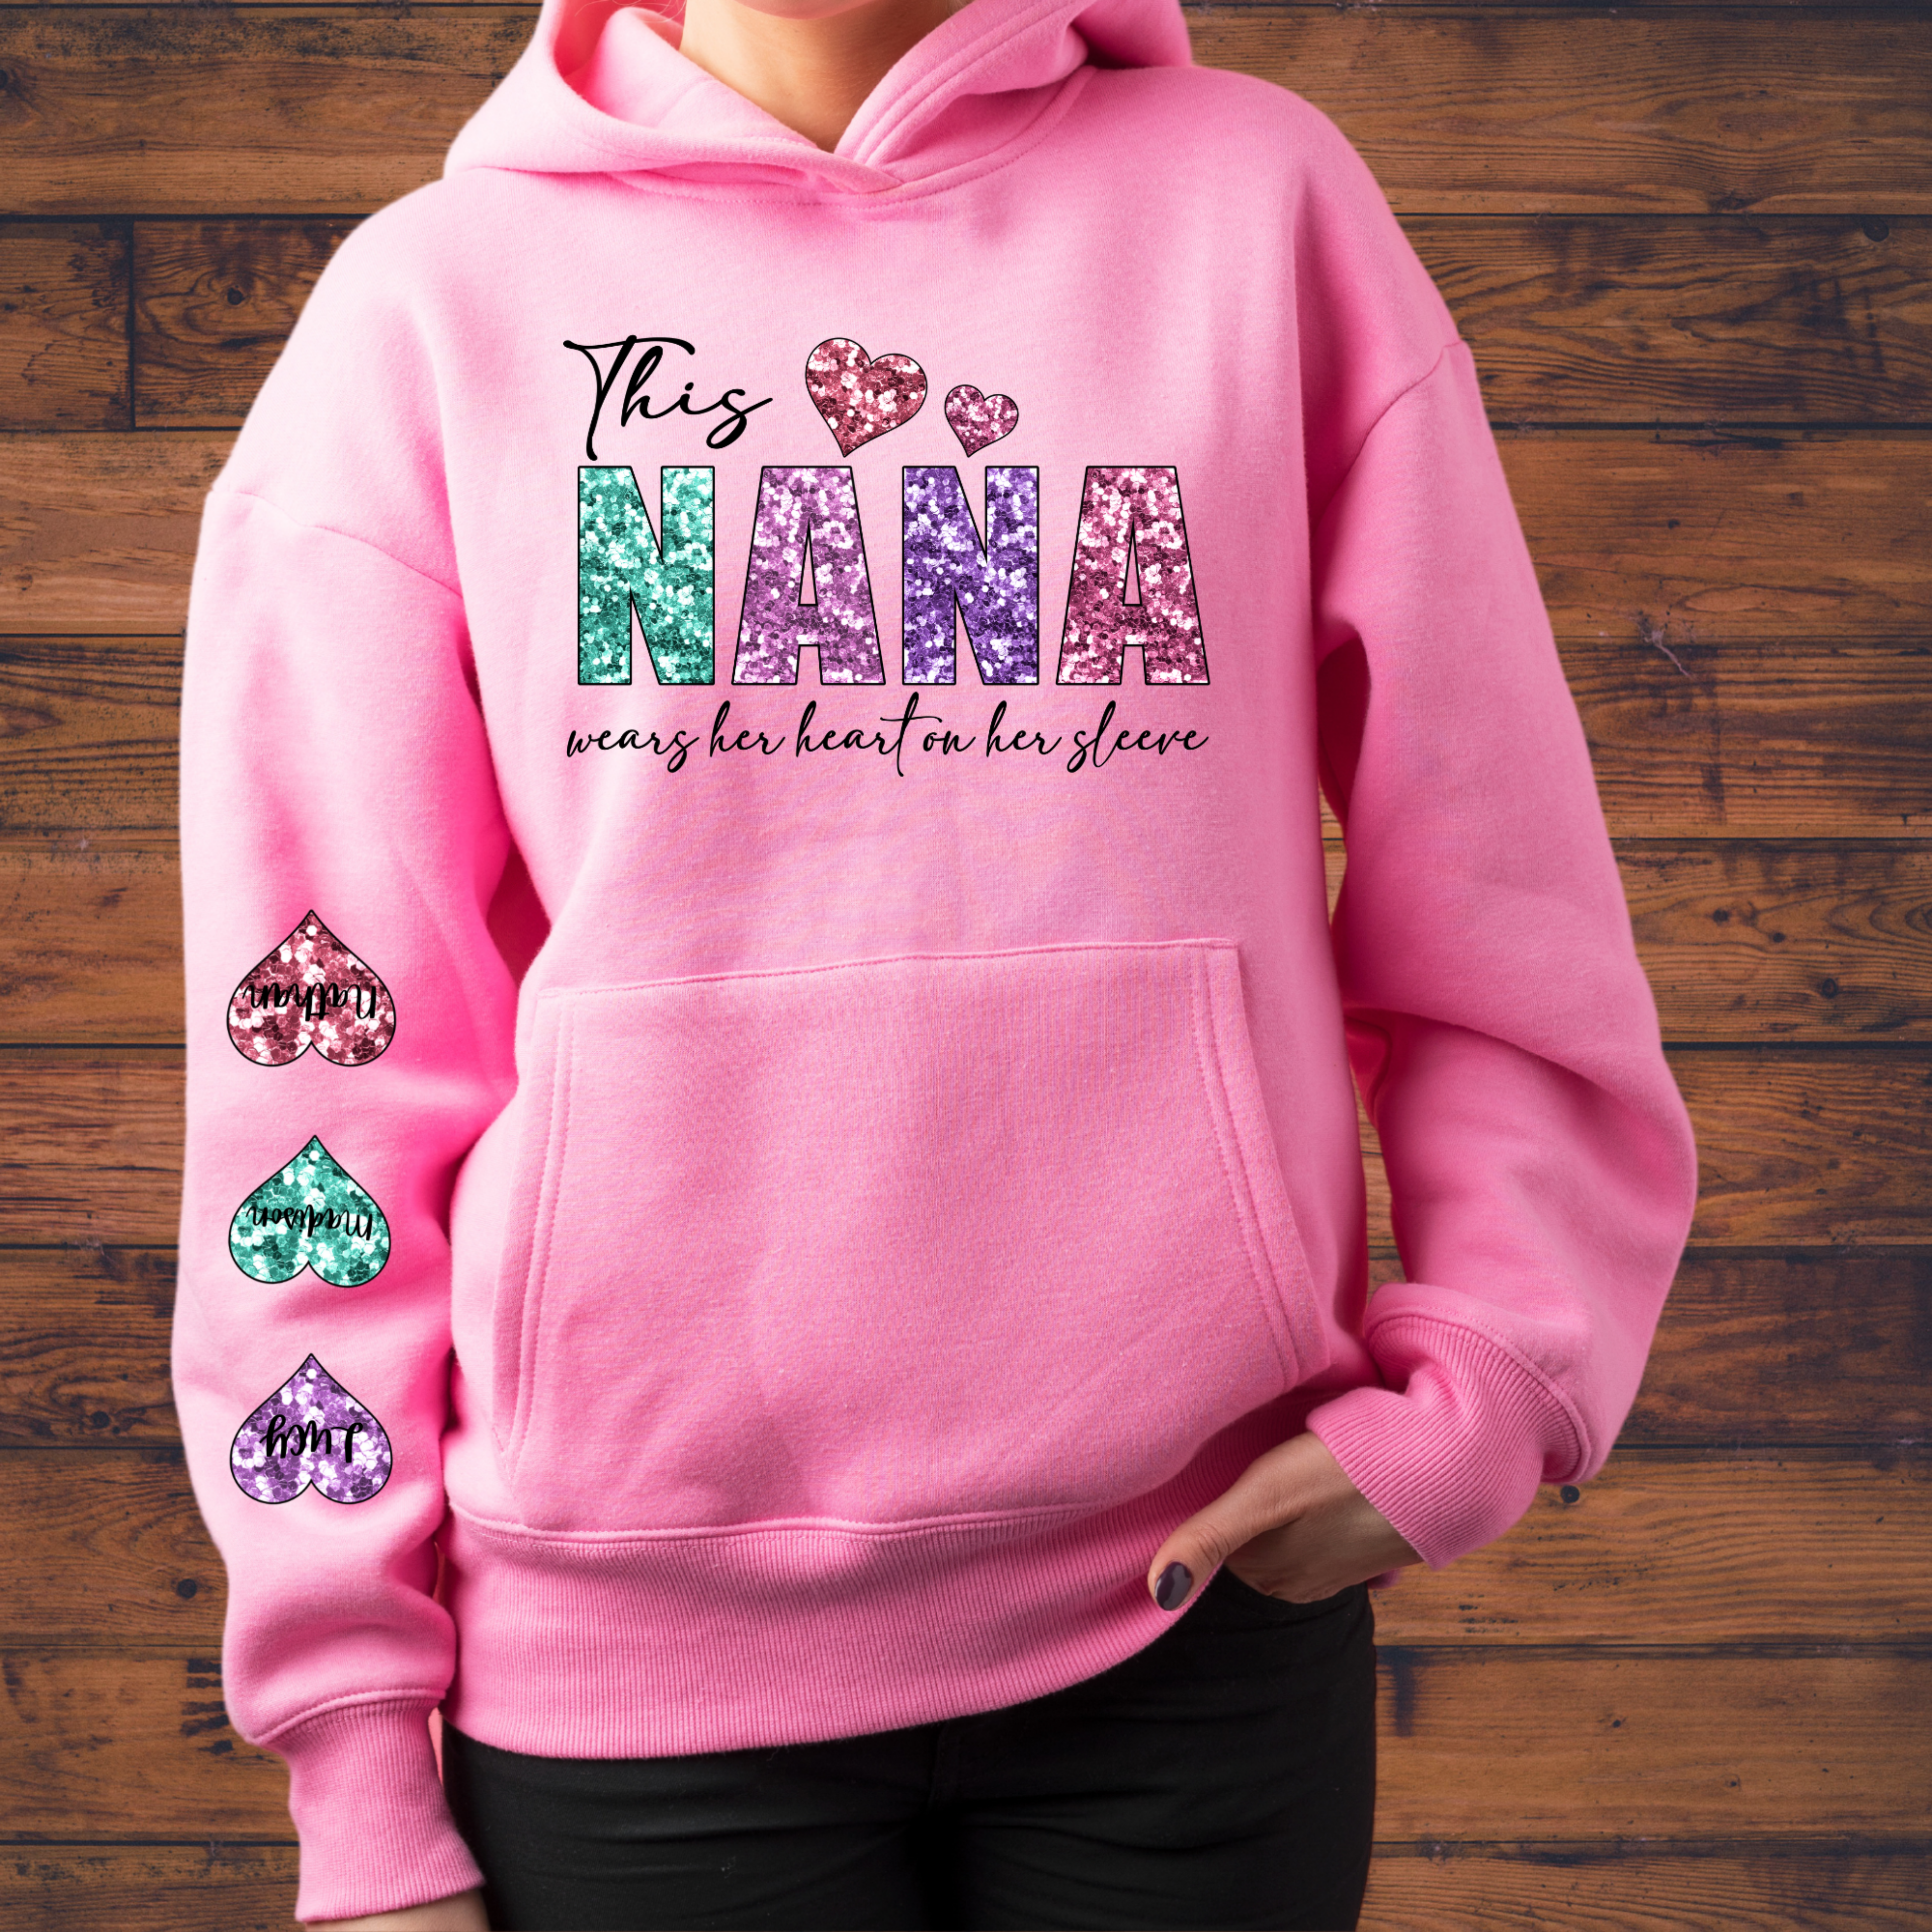 This Nana Wears her heart on her sleeve | Personalized Hoodie